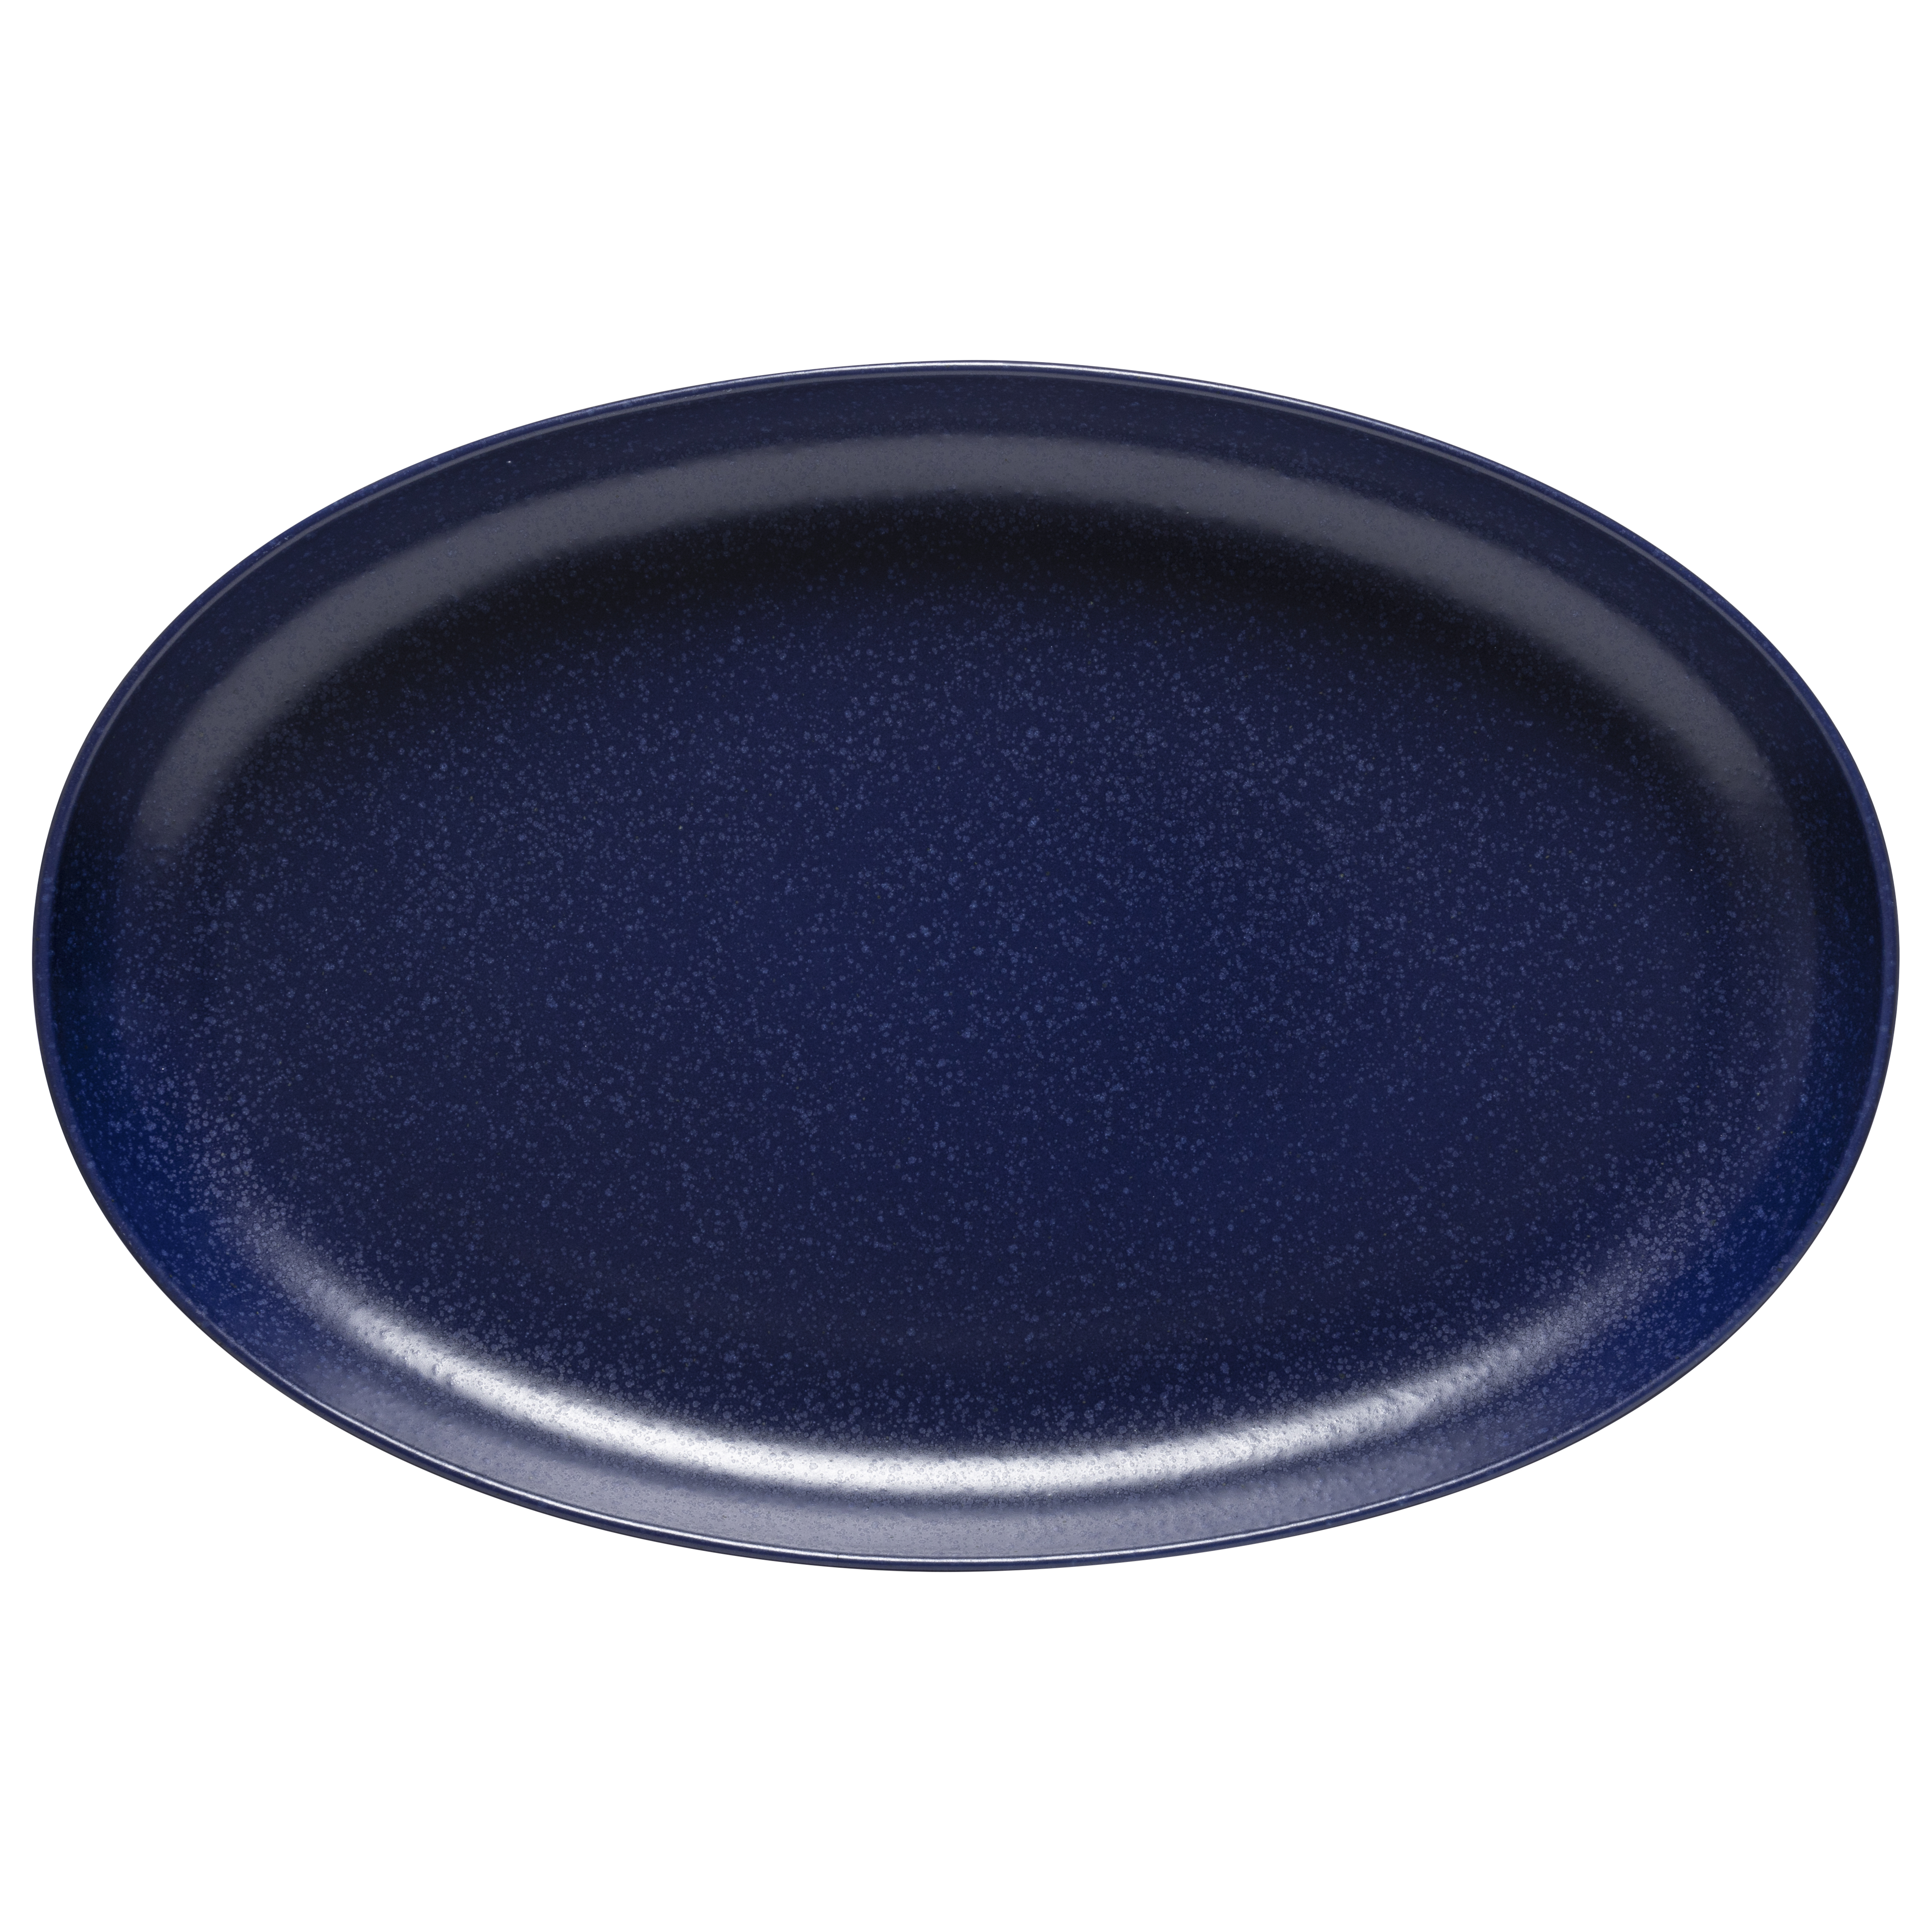 Pacifica Blueberry Oval Platter 40.8cm Gift